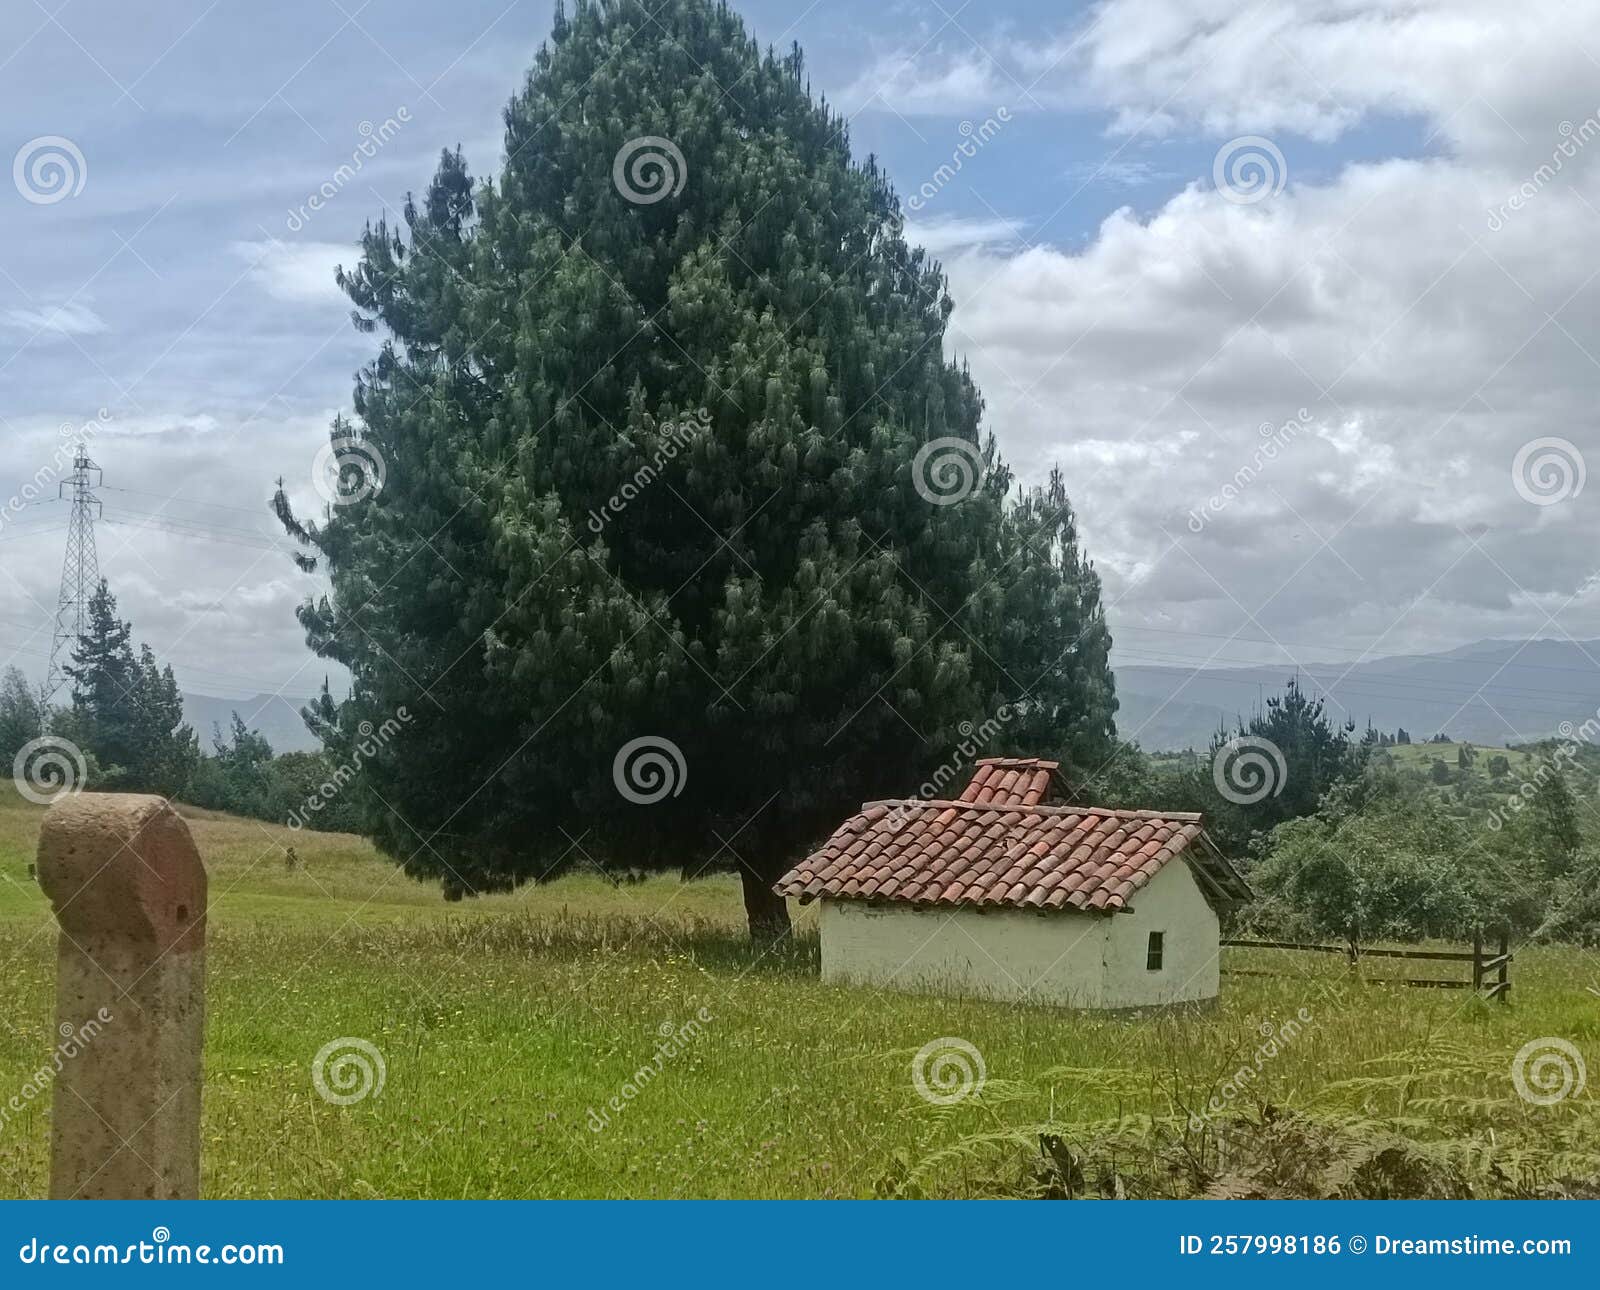 the lonely house in cundinamarca